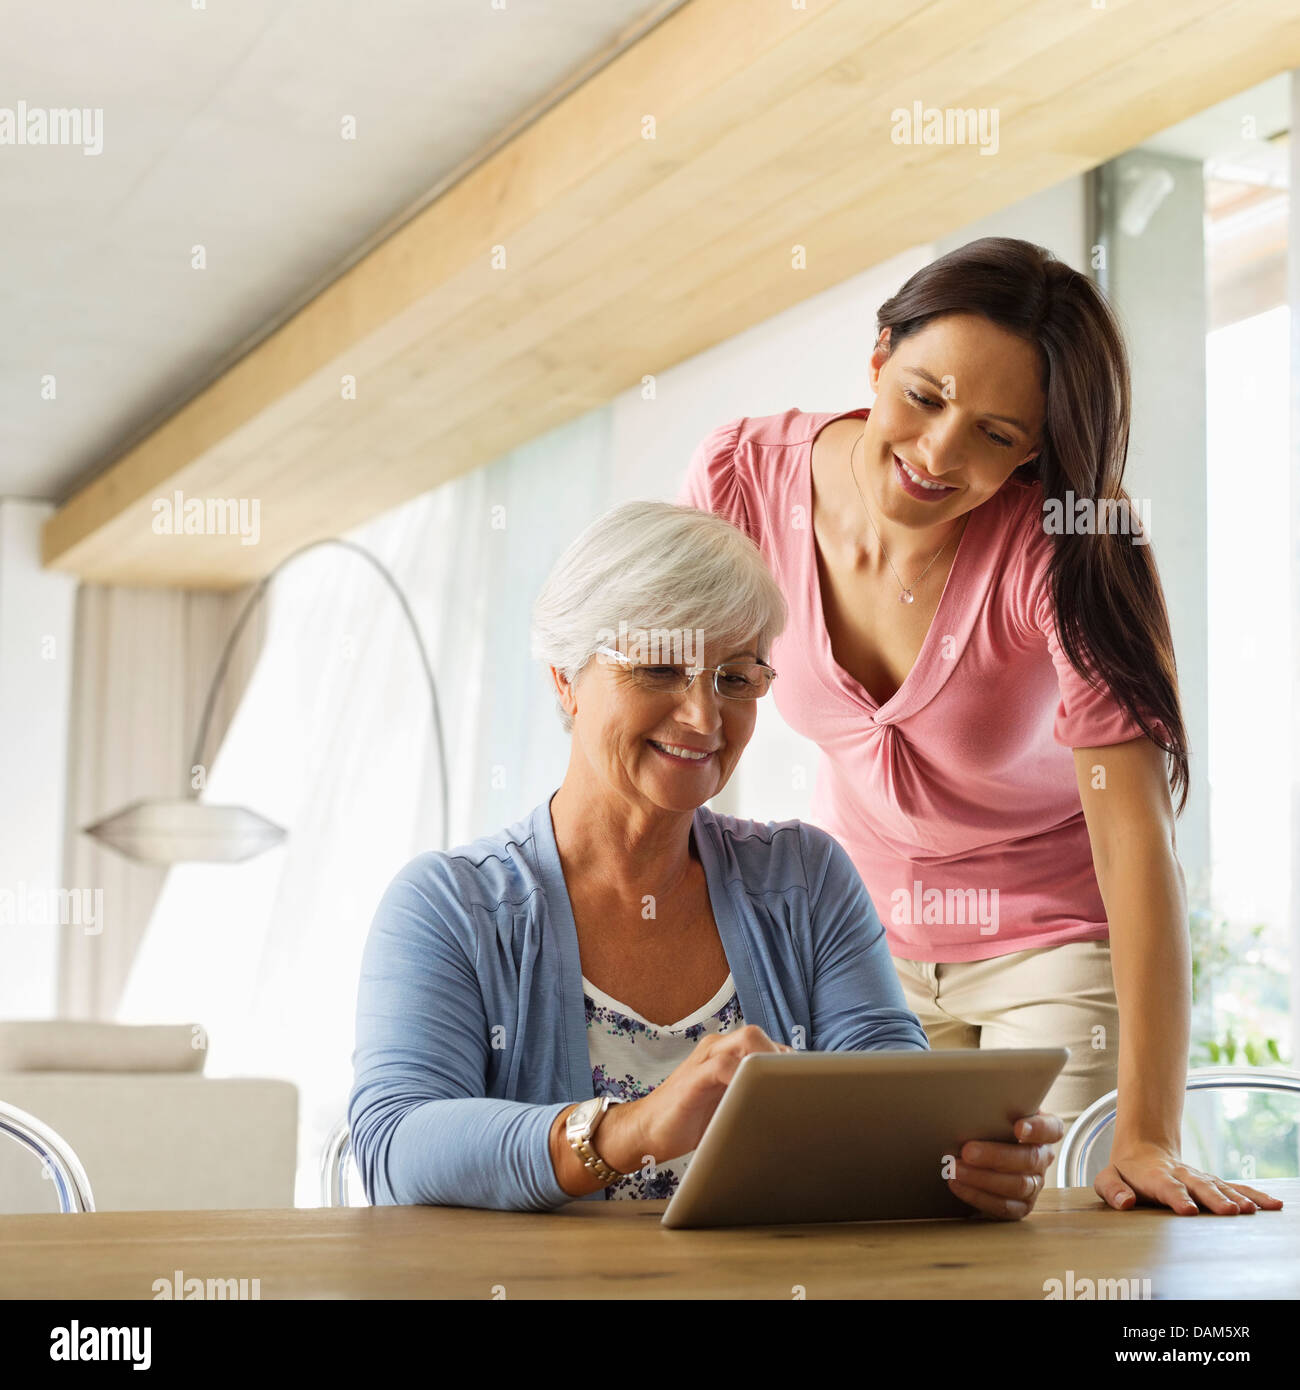 Mother and daughter using tablet computer Stock Photo